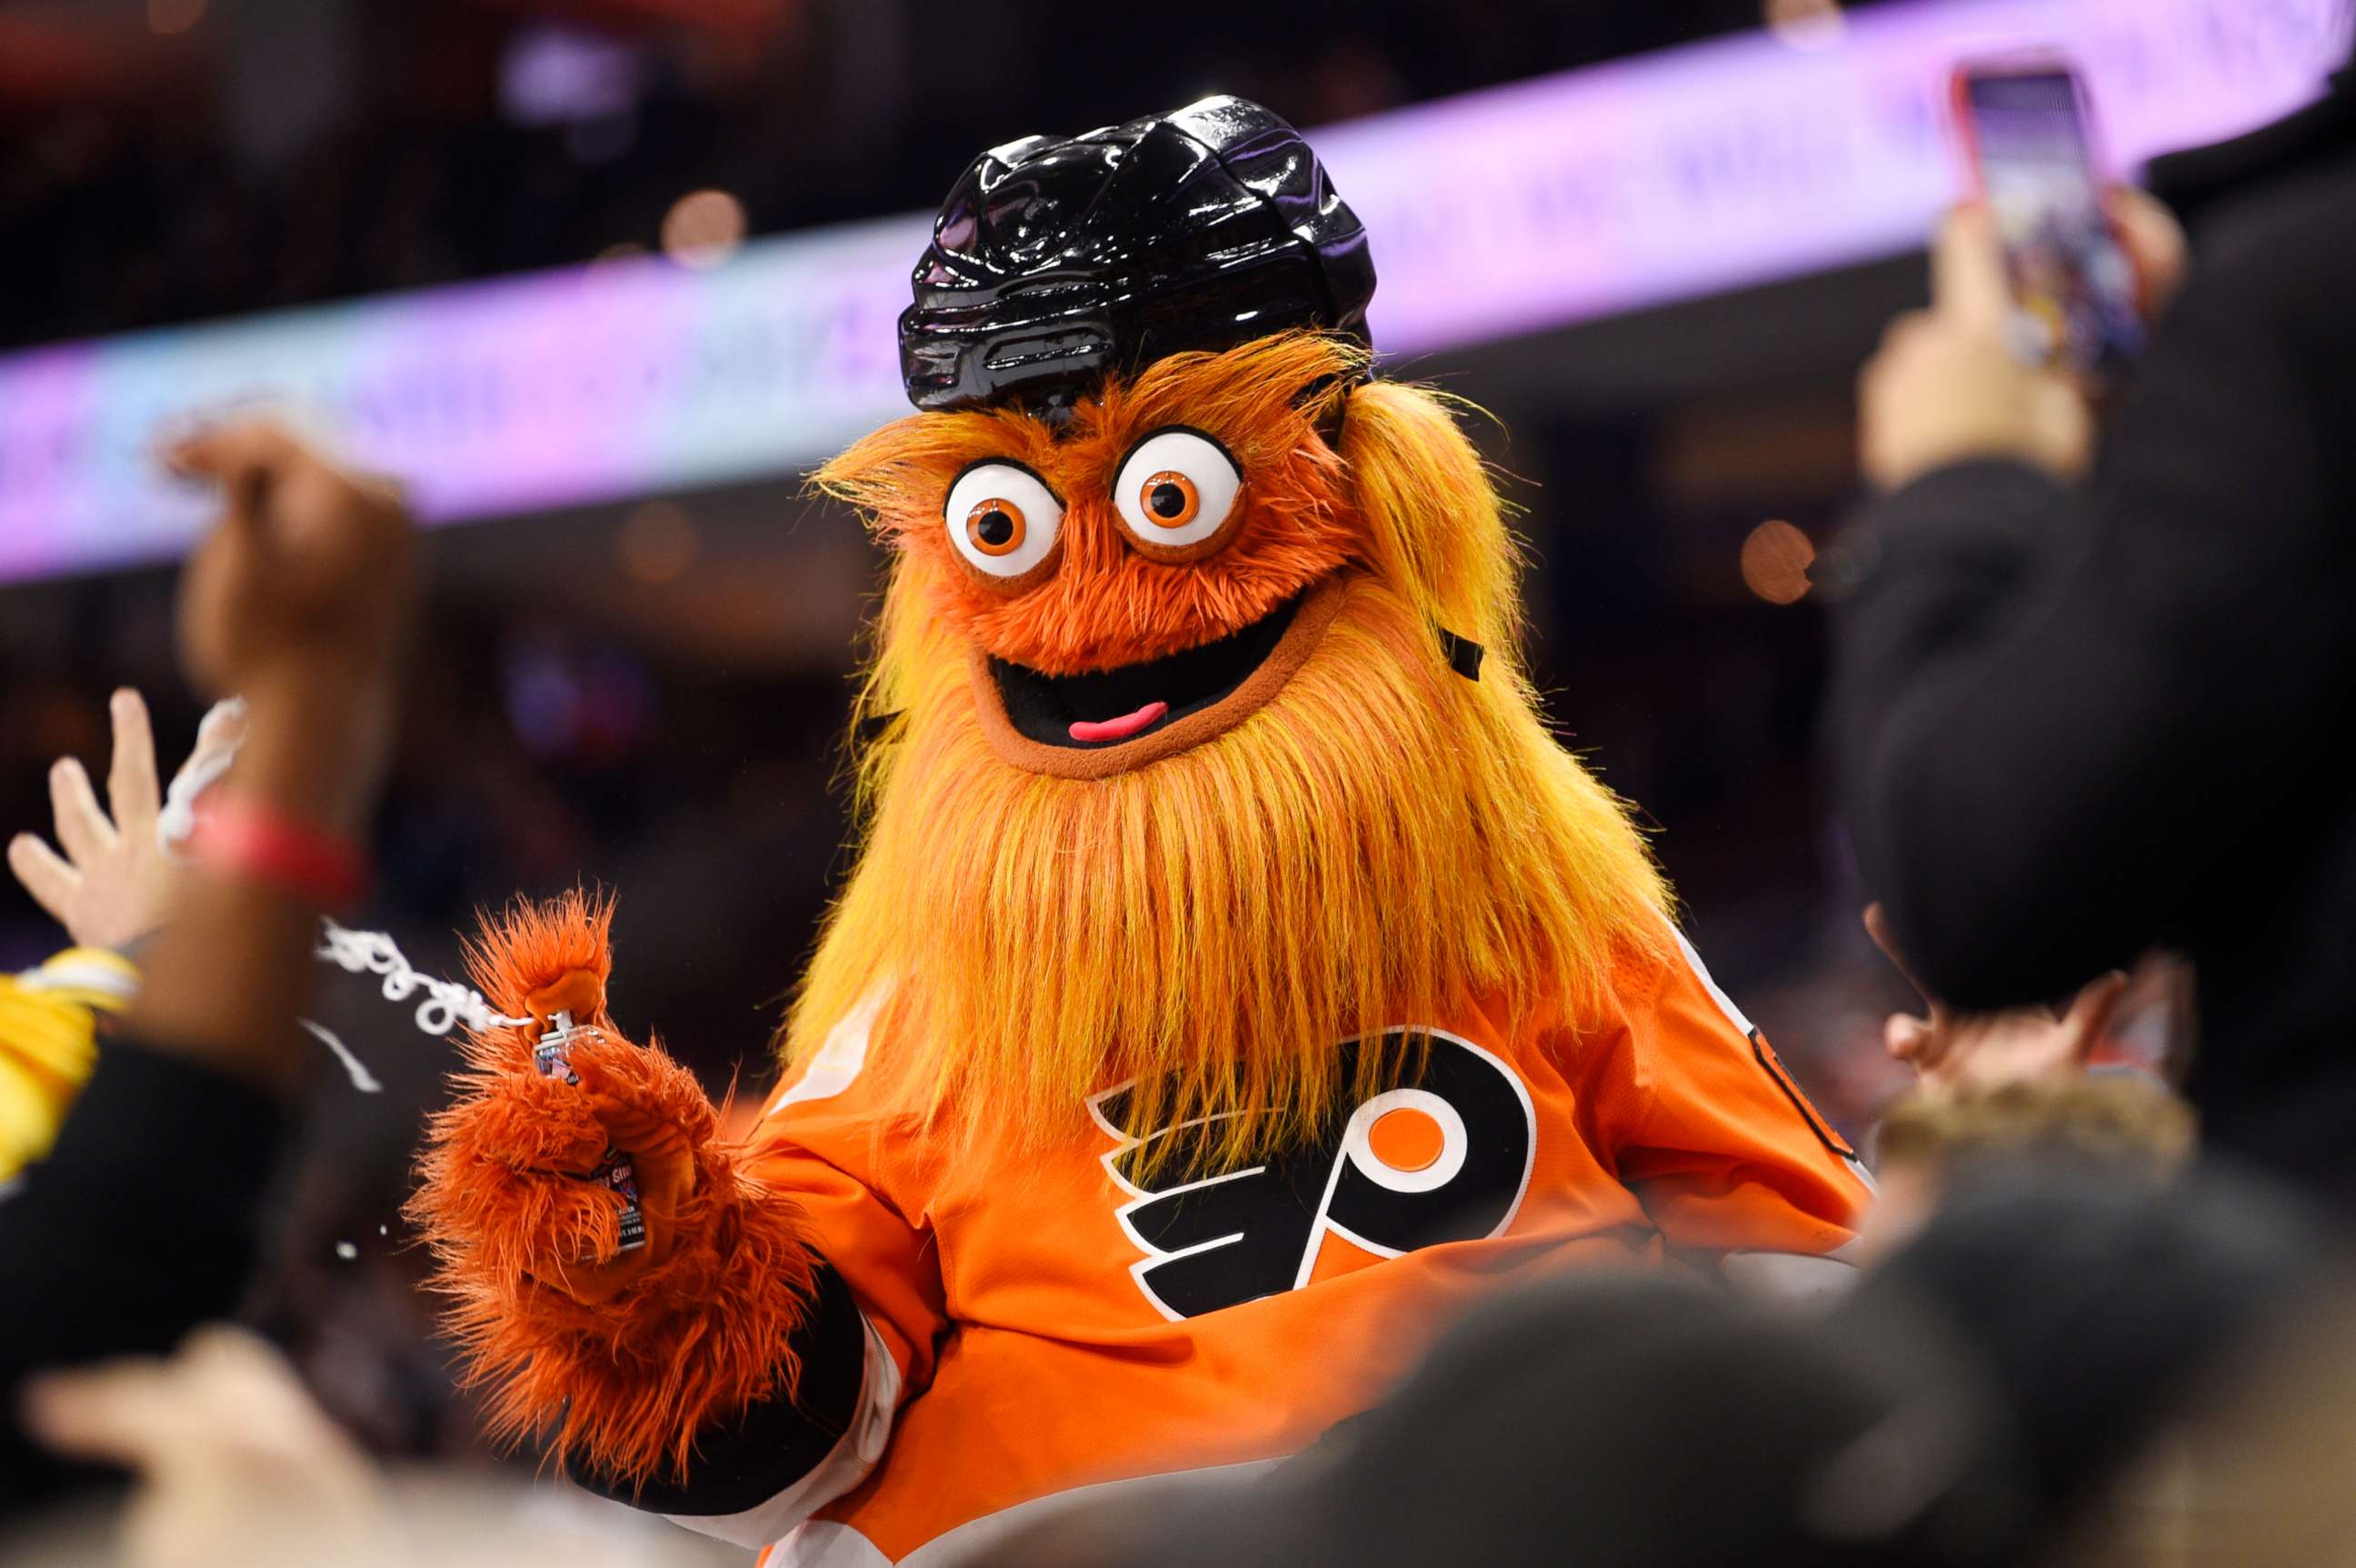 Philadelphia Flyers Mascot Gritty Reportedly Punched Boy in the Back